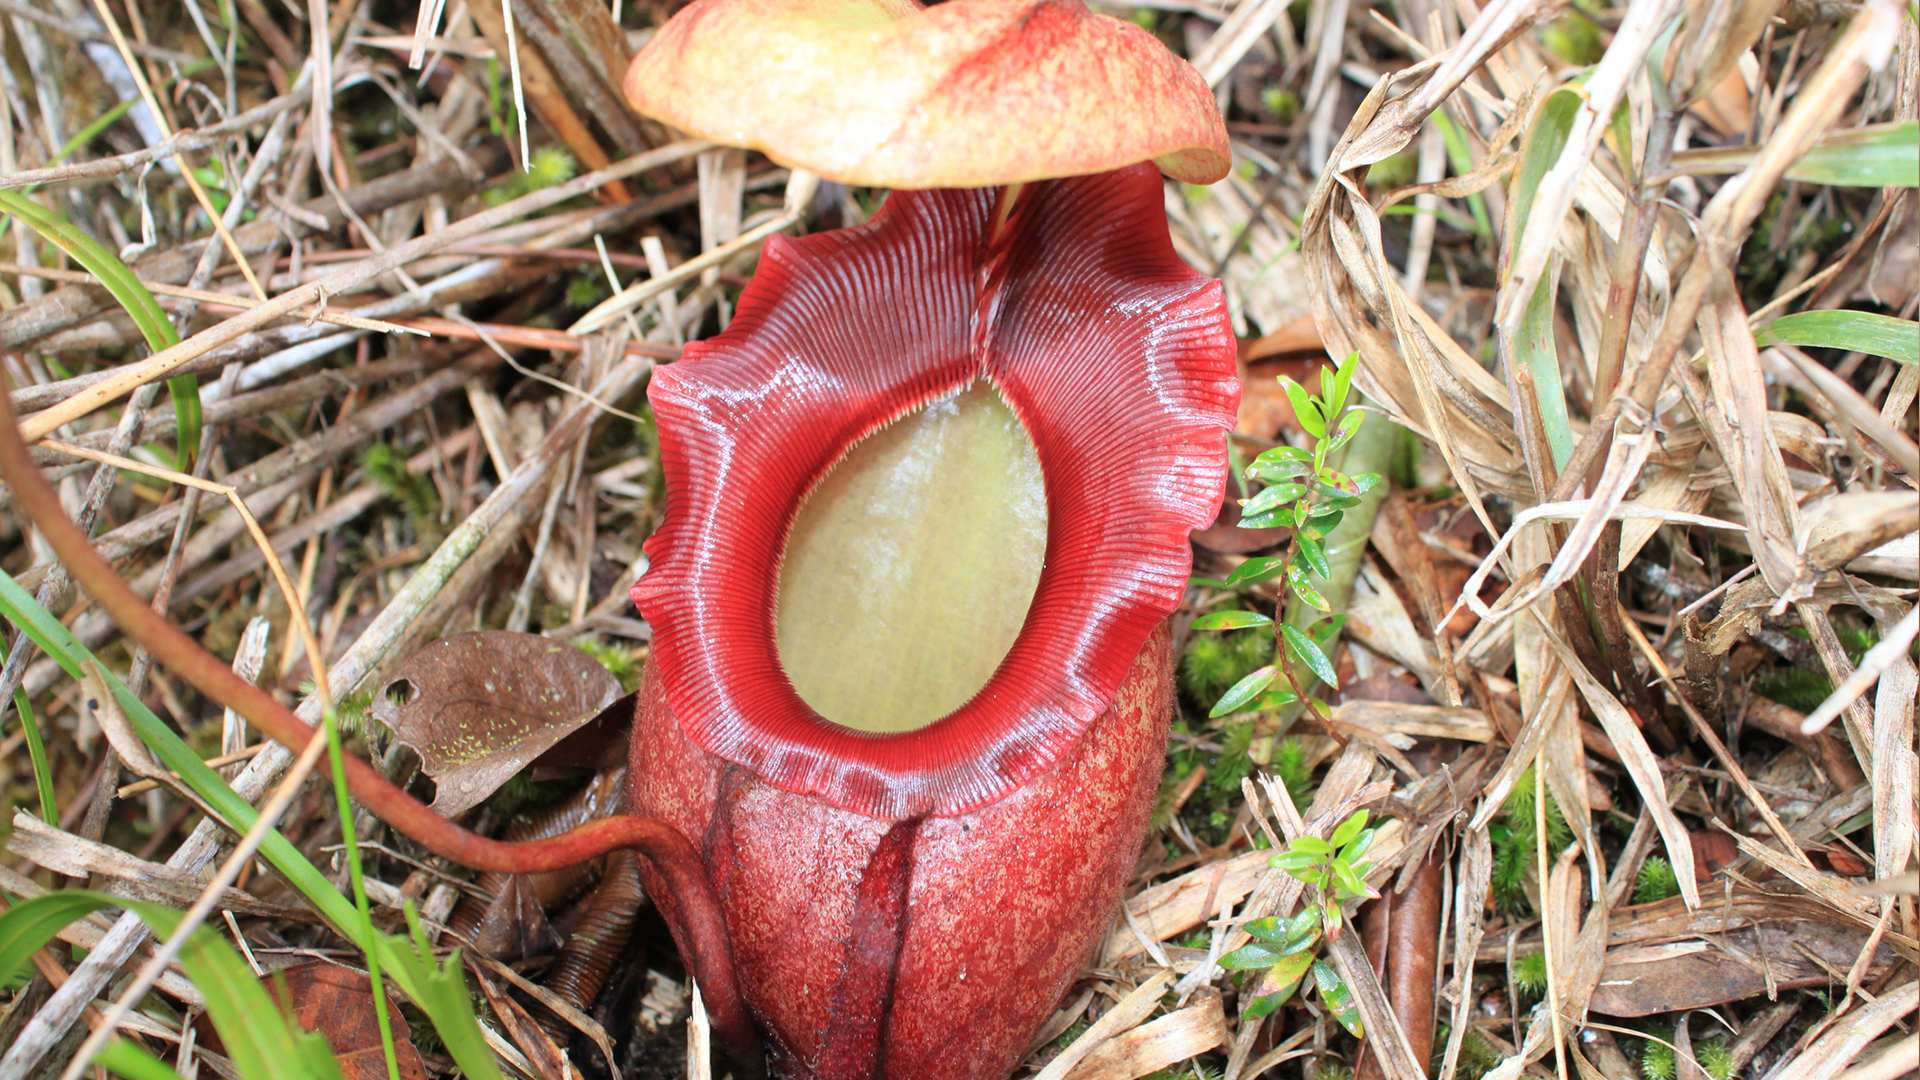 Large red pitcher shaped plant amongst long grass